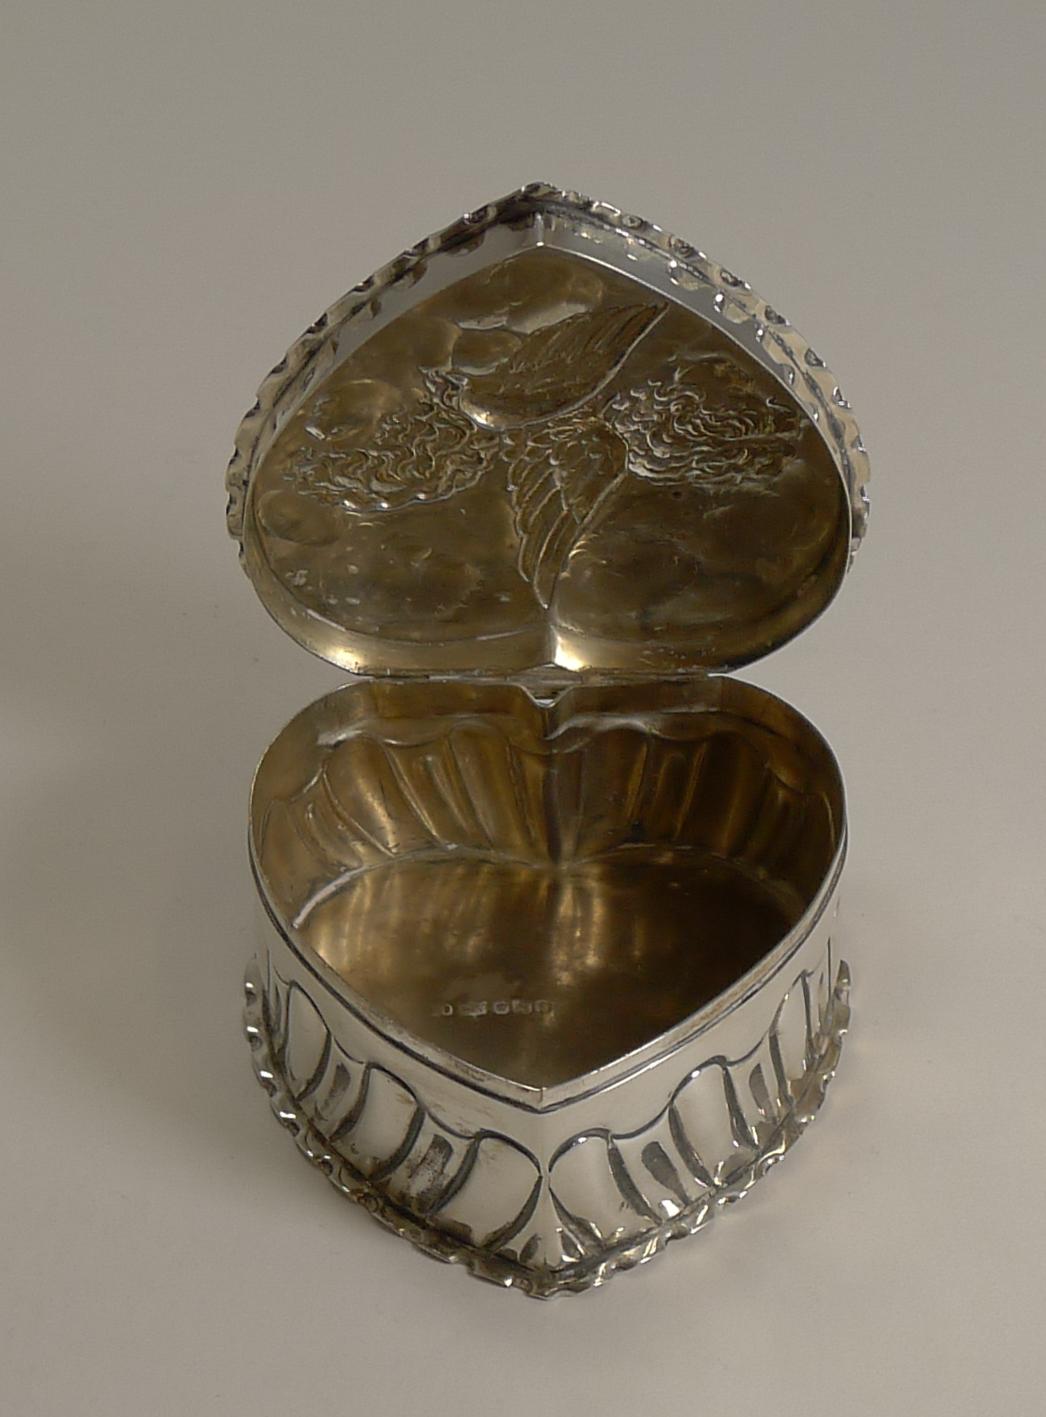 Late 19th Century Large Antique English Sterling Silver Heart Box - Cherubs / Angels - 1898